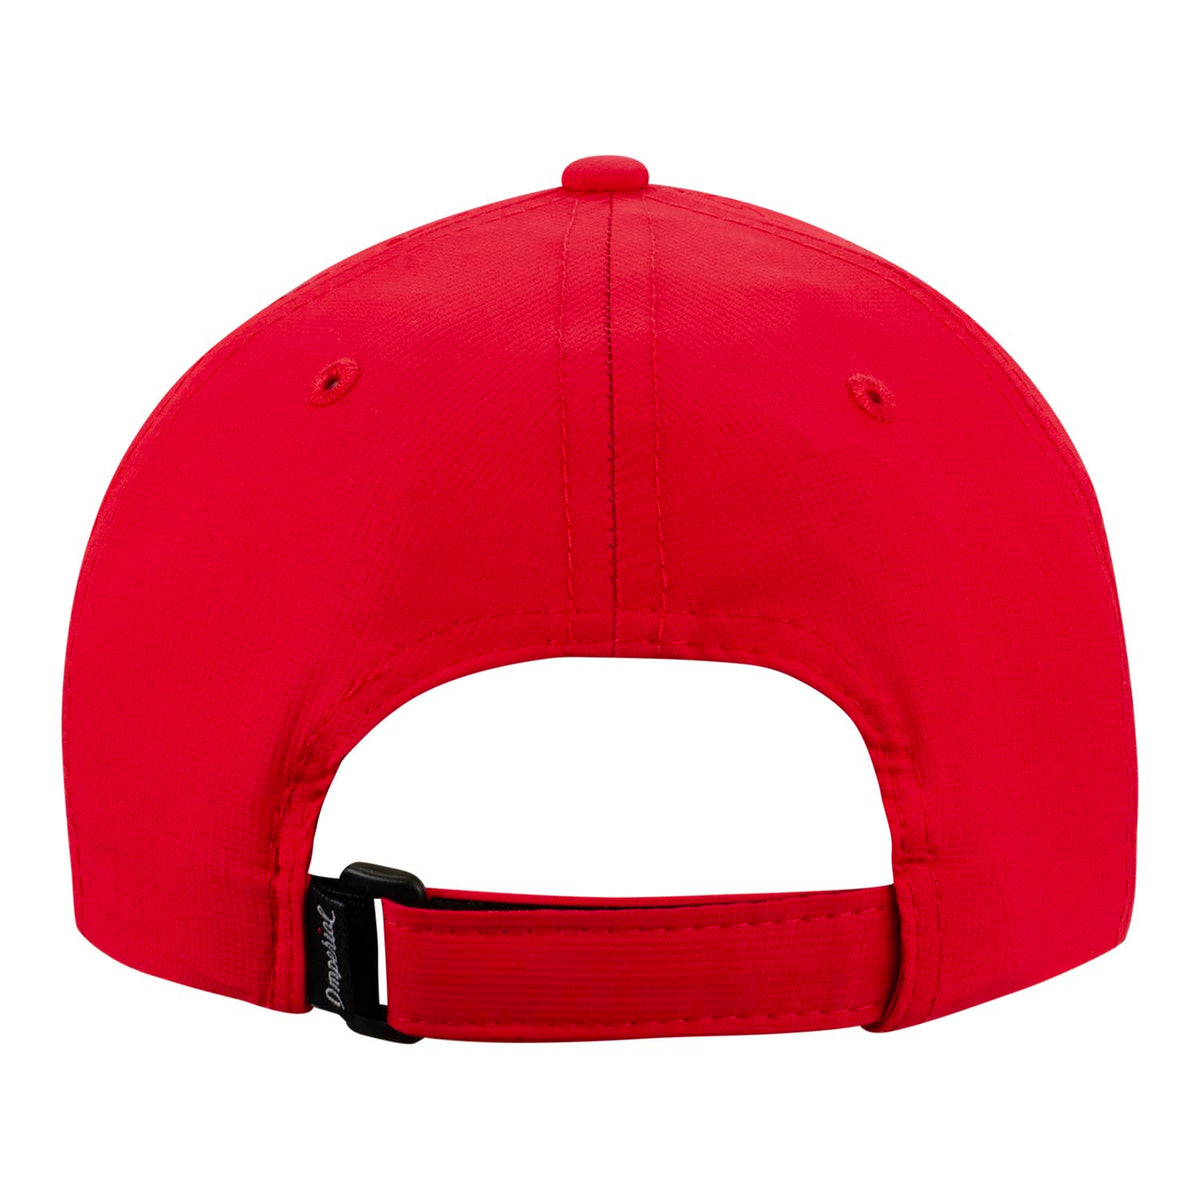 Imperial 2023 Ryder Cup The Original Performance Cap in Red Pepper- Back View